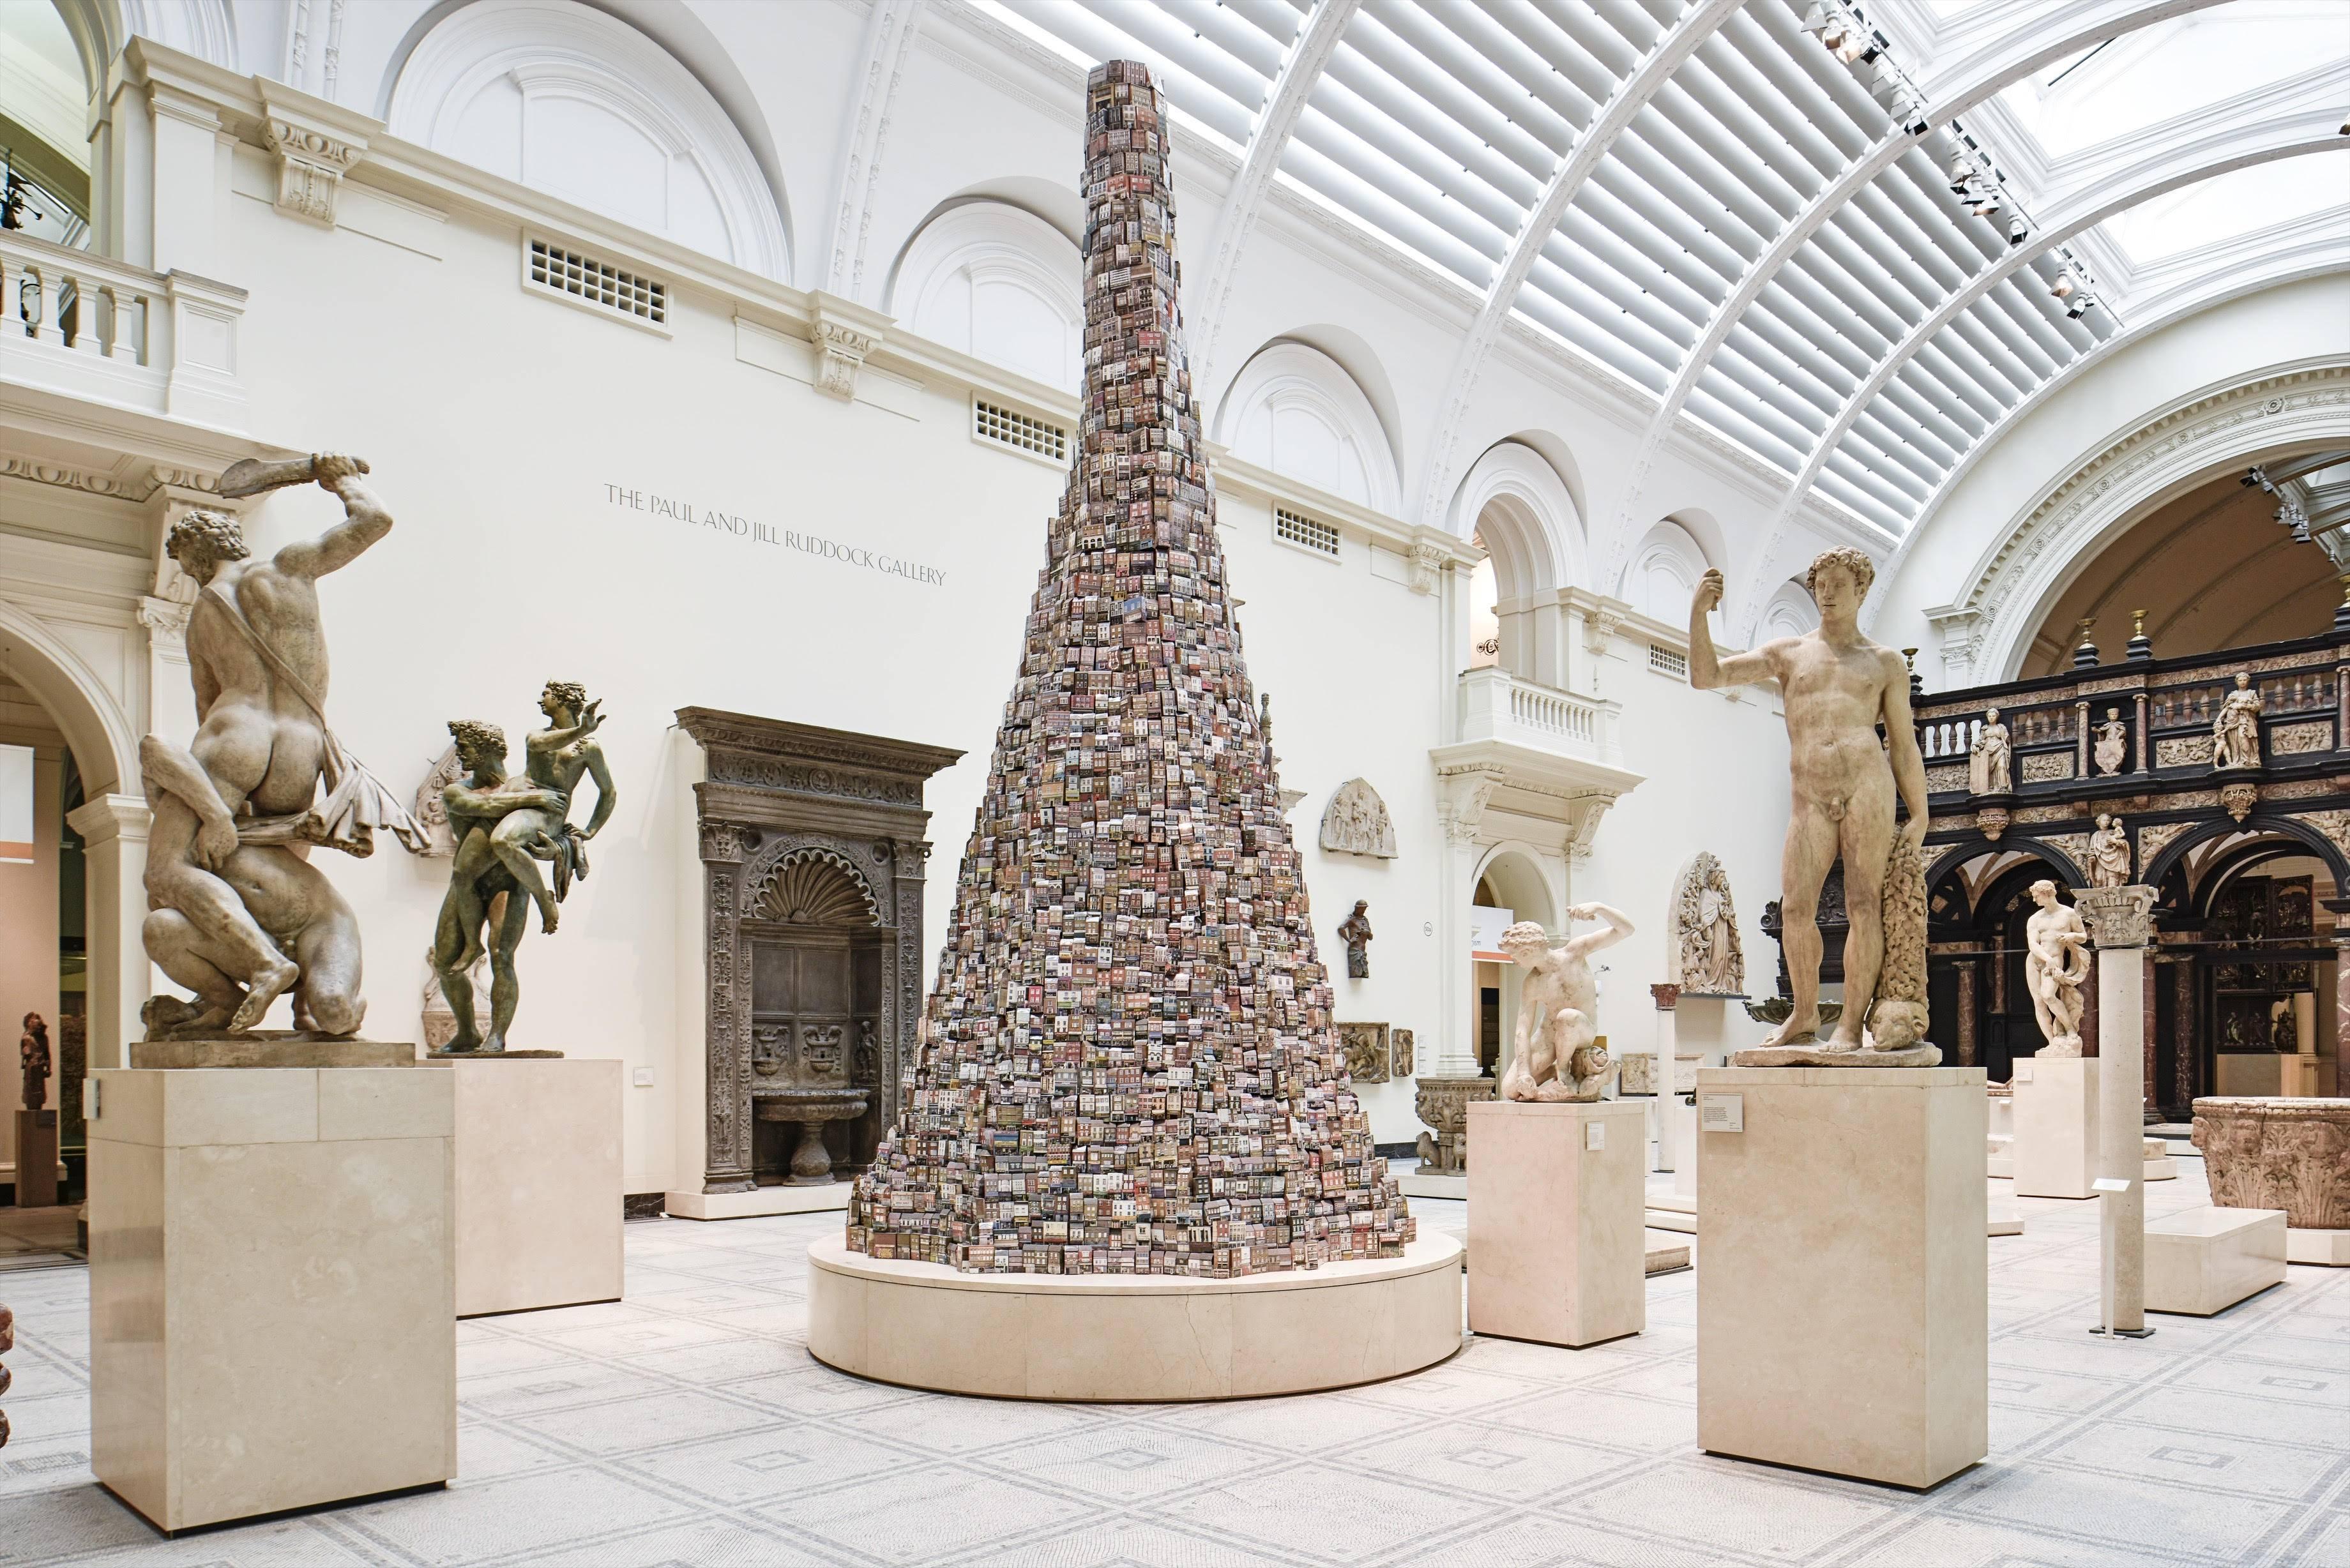 Created especially for the V&A by artist Barnaby Barford, The Tower of Babel was displayed in the V&A’s Medieval & Renaissance Galleries from 8 September to 1 November 2015.

The Tower of Babel is Barnaby Barford’s representation of London today.